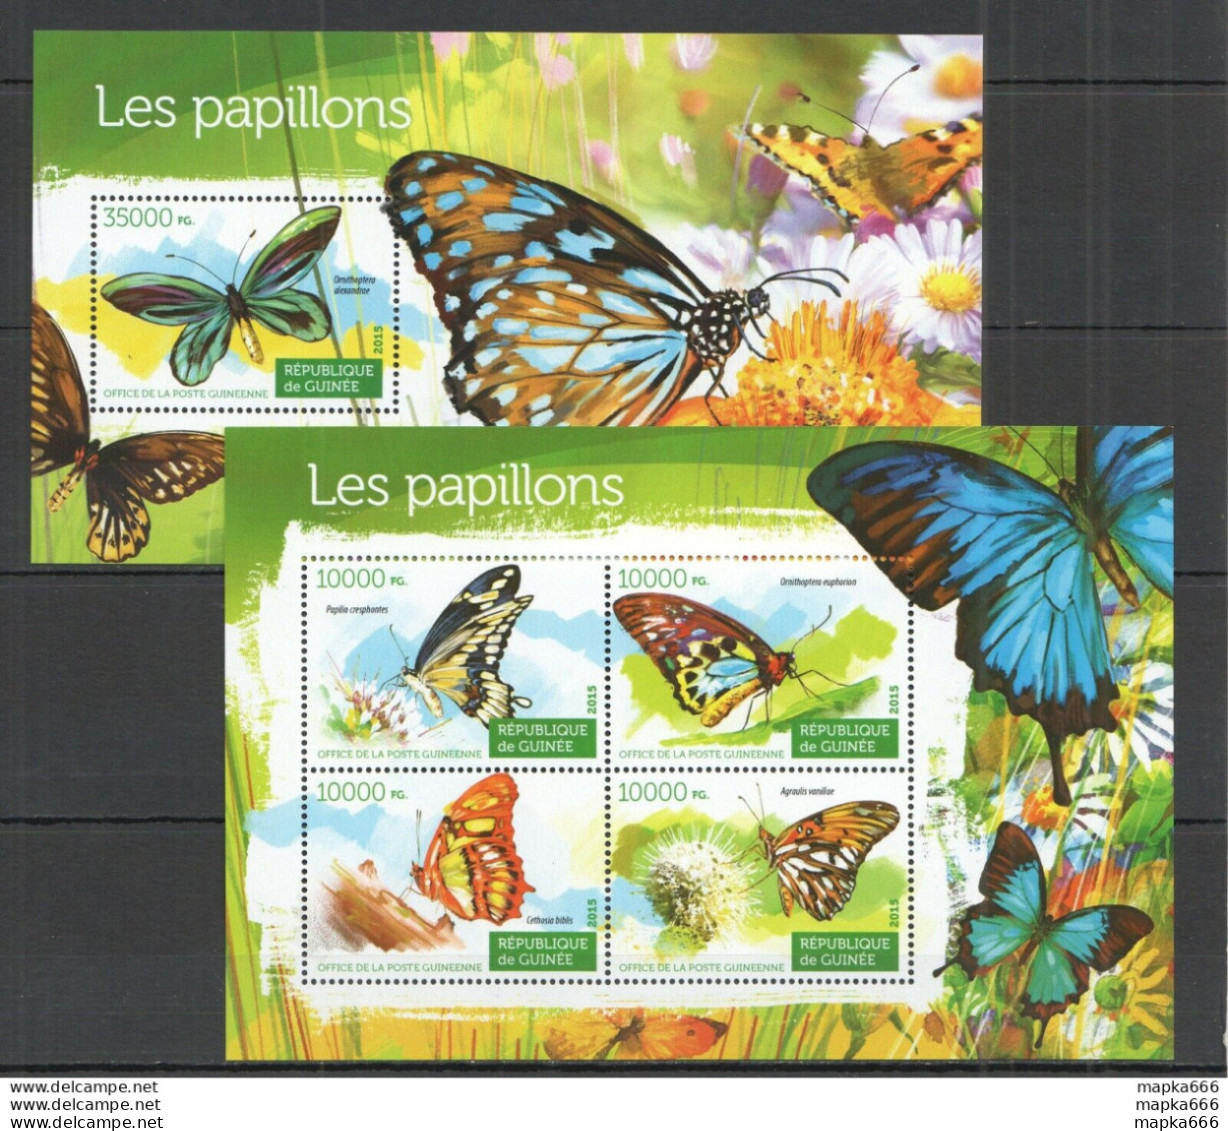 St134 2015 Guinea Butterflies Fauna Insects Les Papillons 1Kb+1Bl Mnh Stamps - Papillons